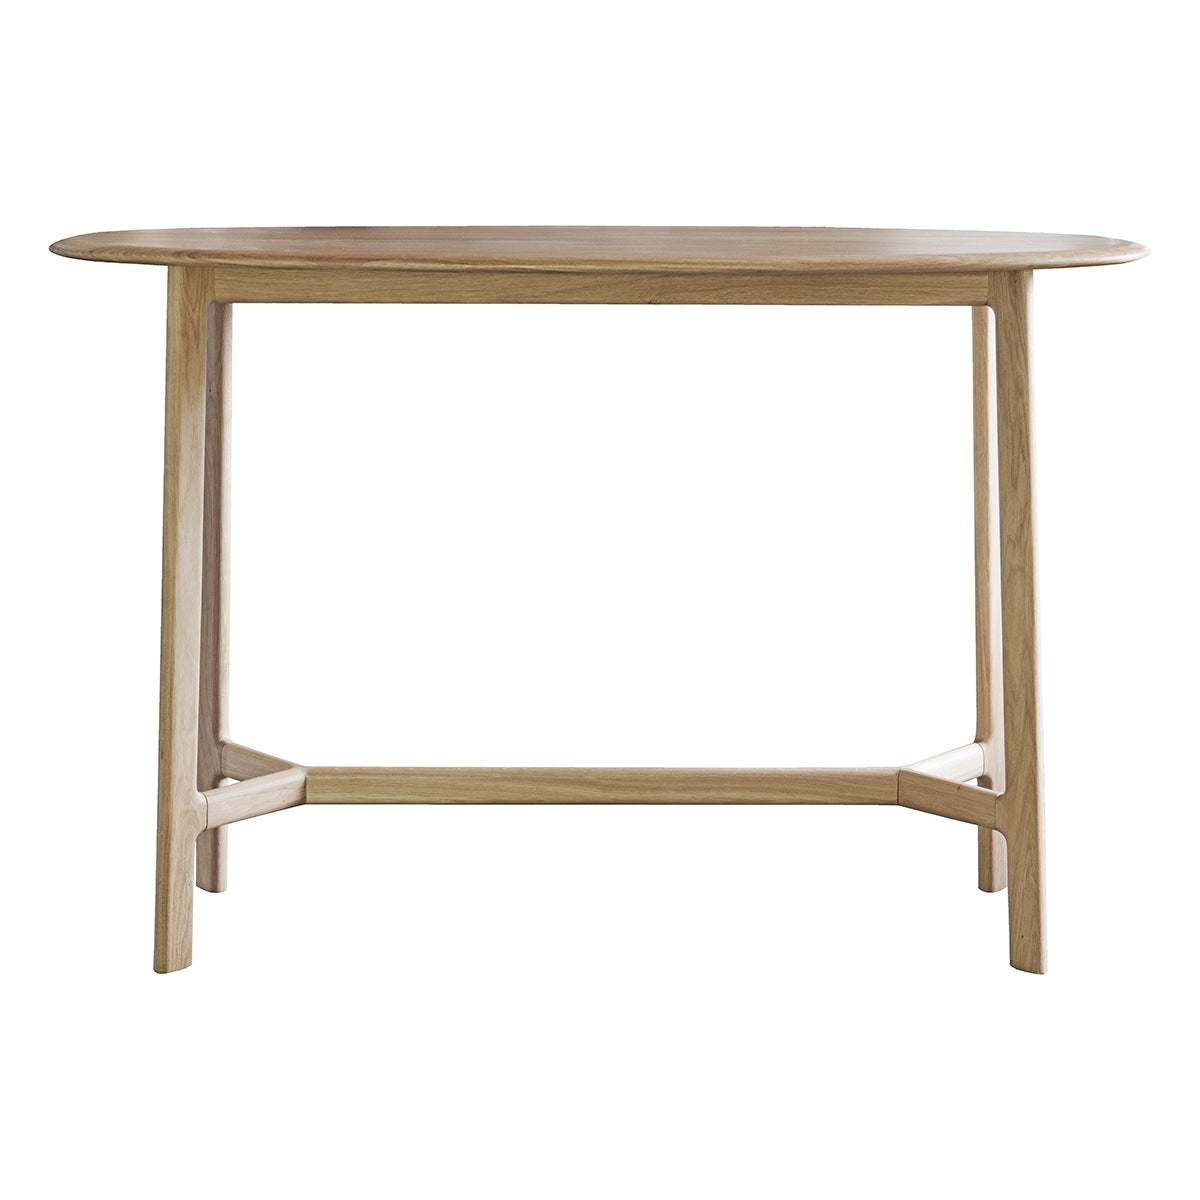 A stylish Dairy Console Table with wooden top and legs for interior decor.